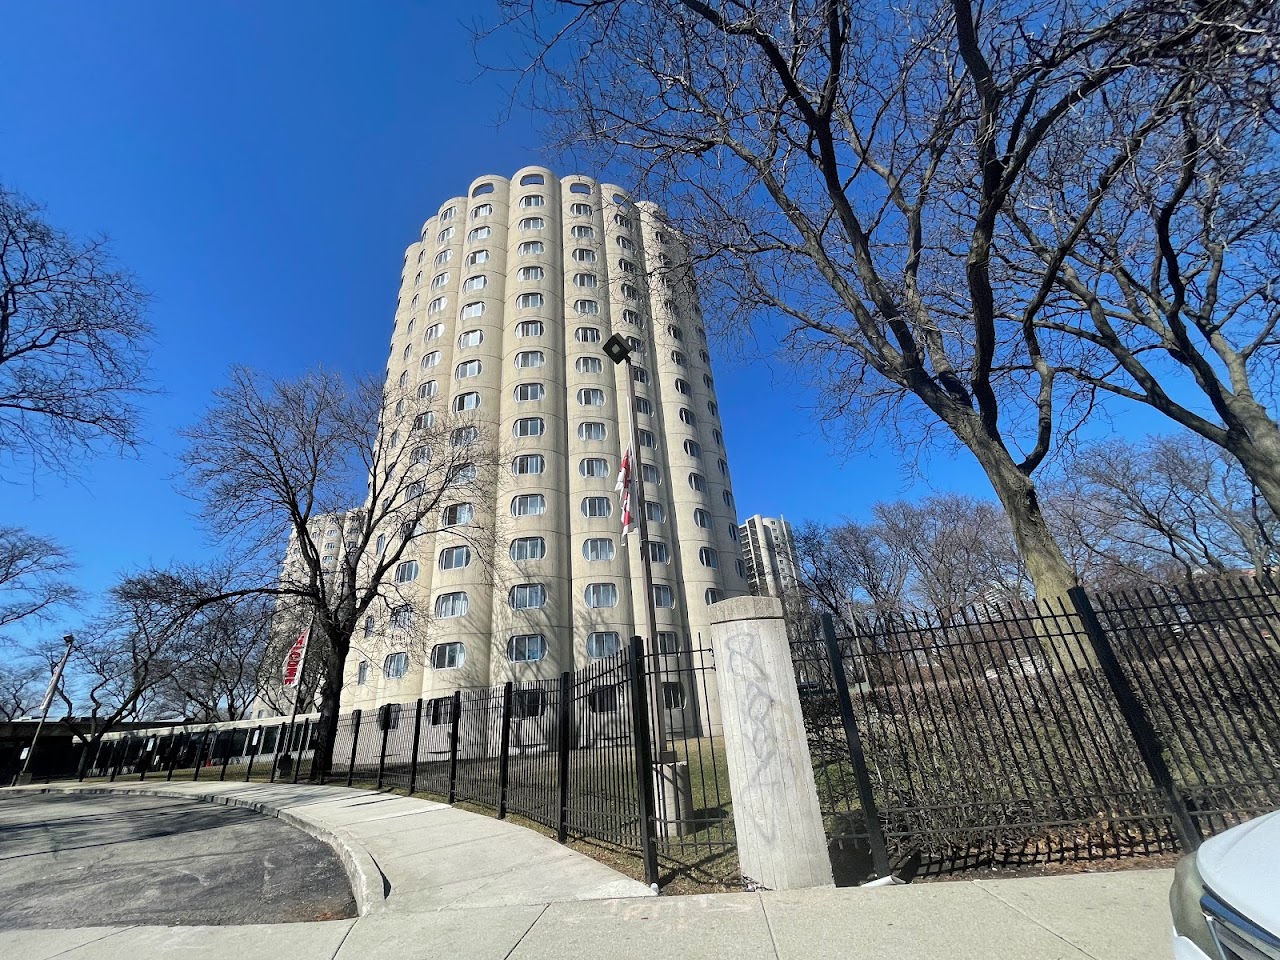 Photo of HILLIARD HOMES I at 2111 S CLARK ST CHICAGO, IL 60616